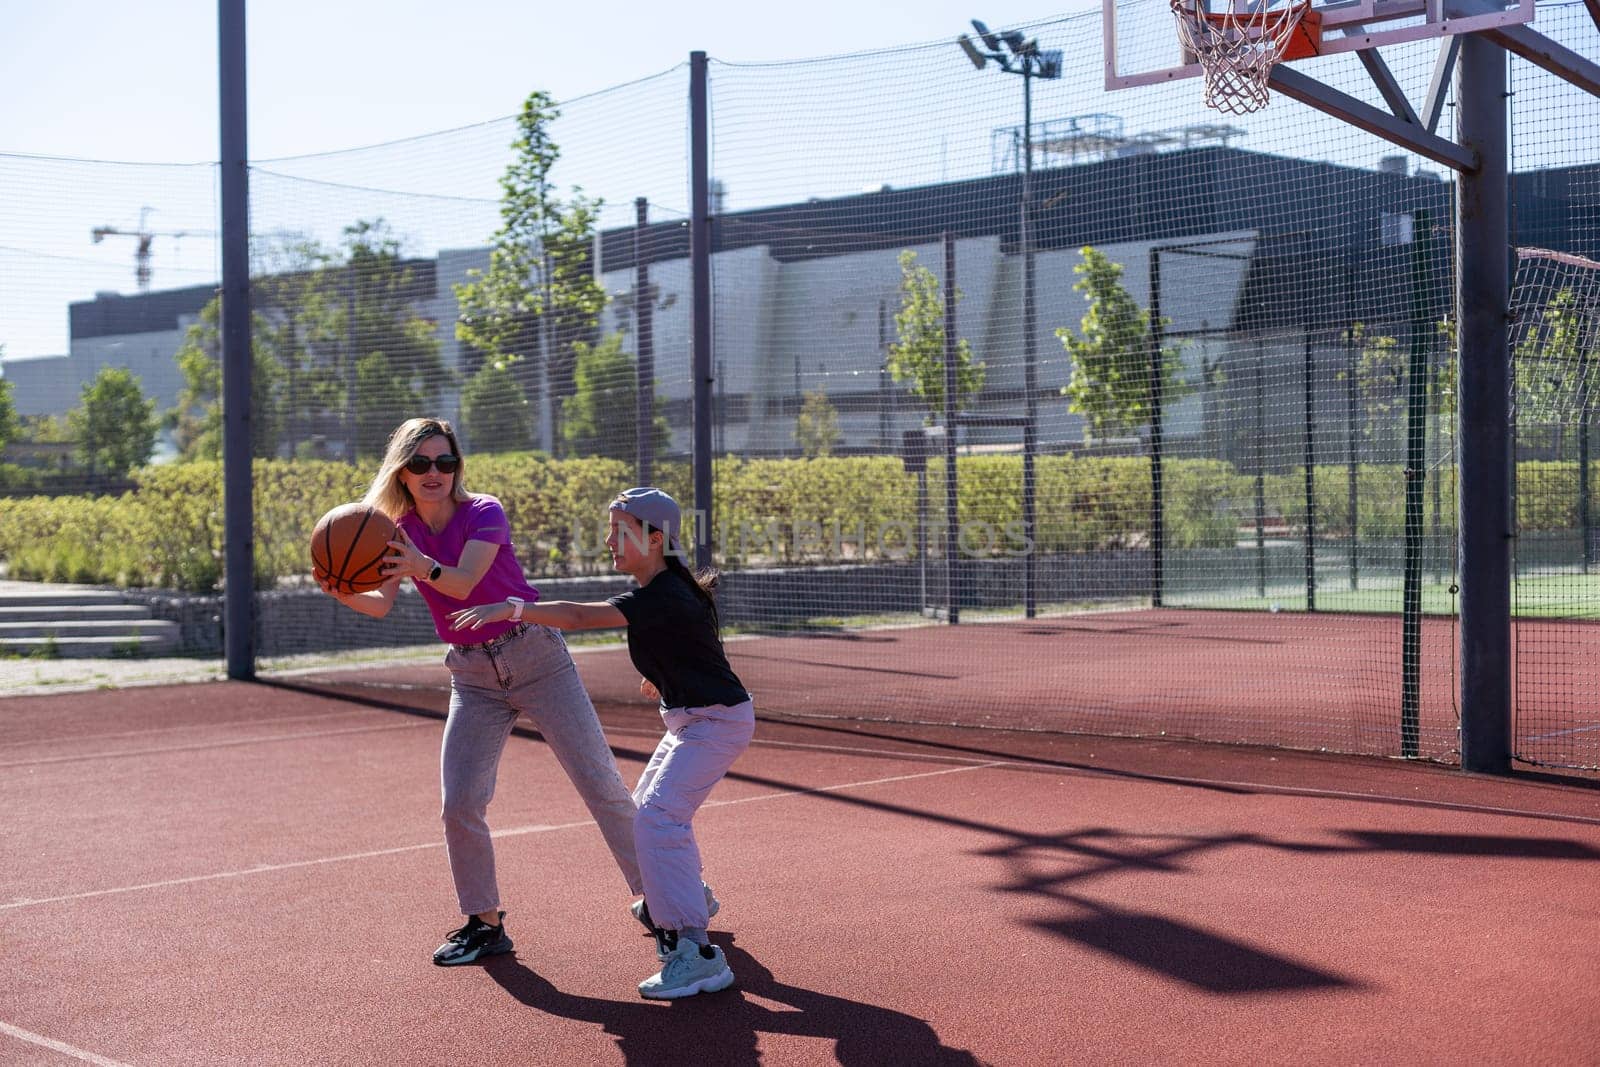 A Happy mother and child daughter outside at basketball court. High quality photo